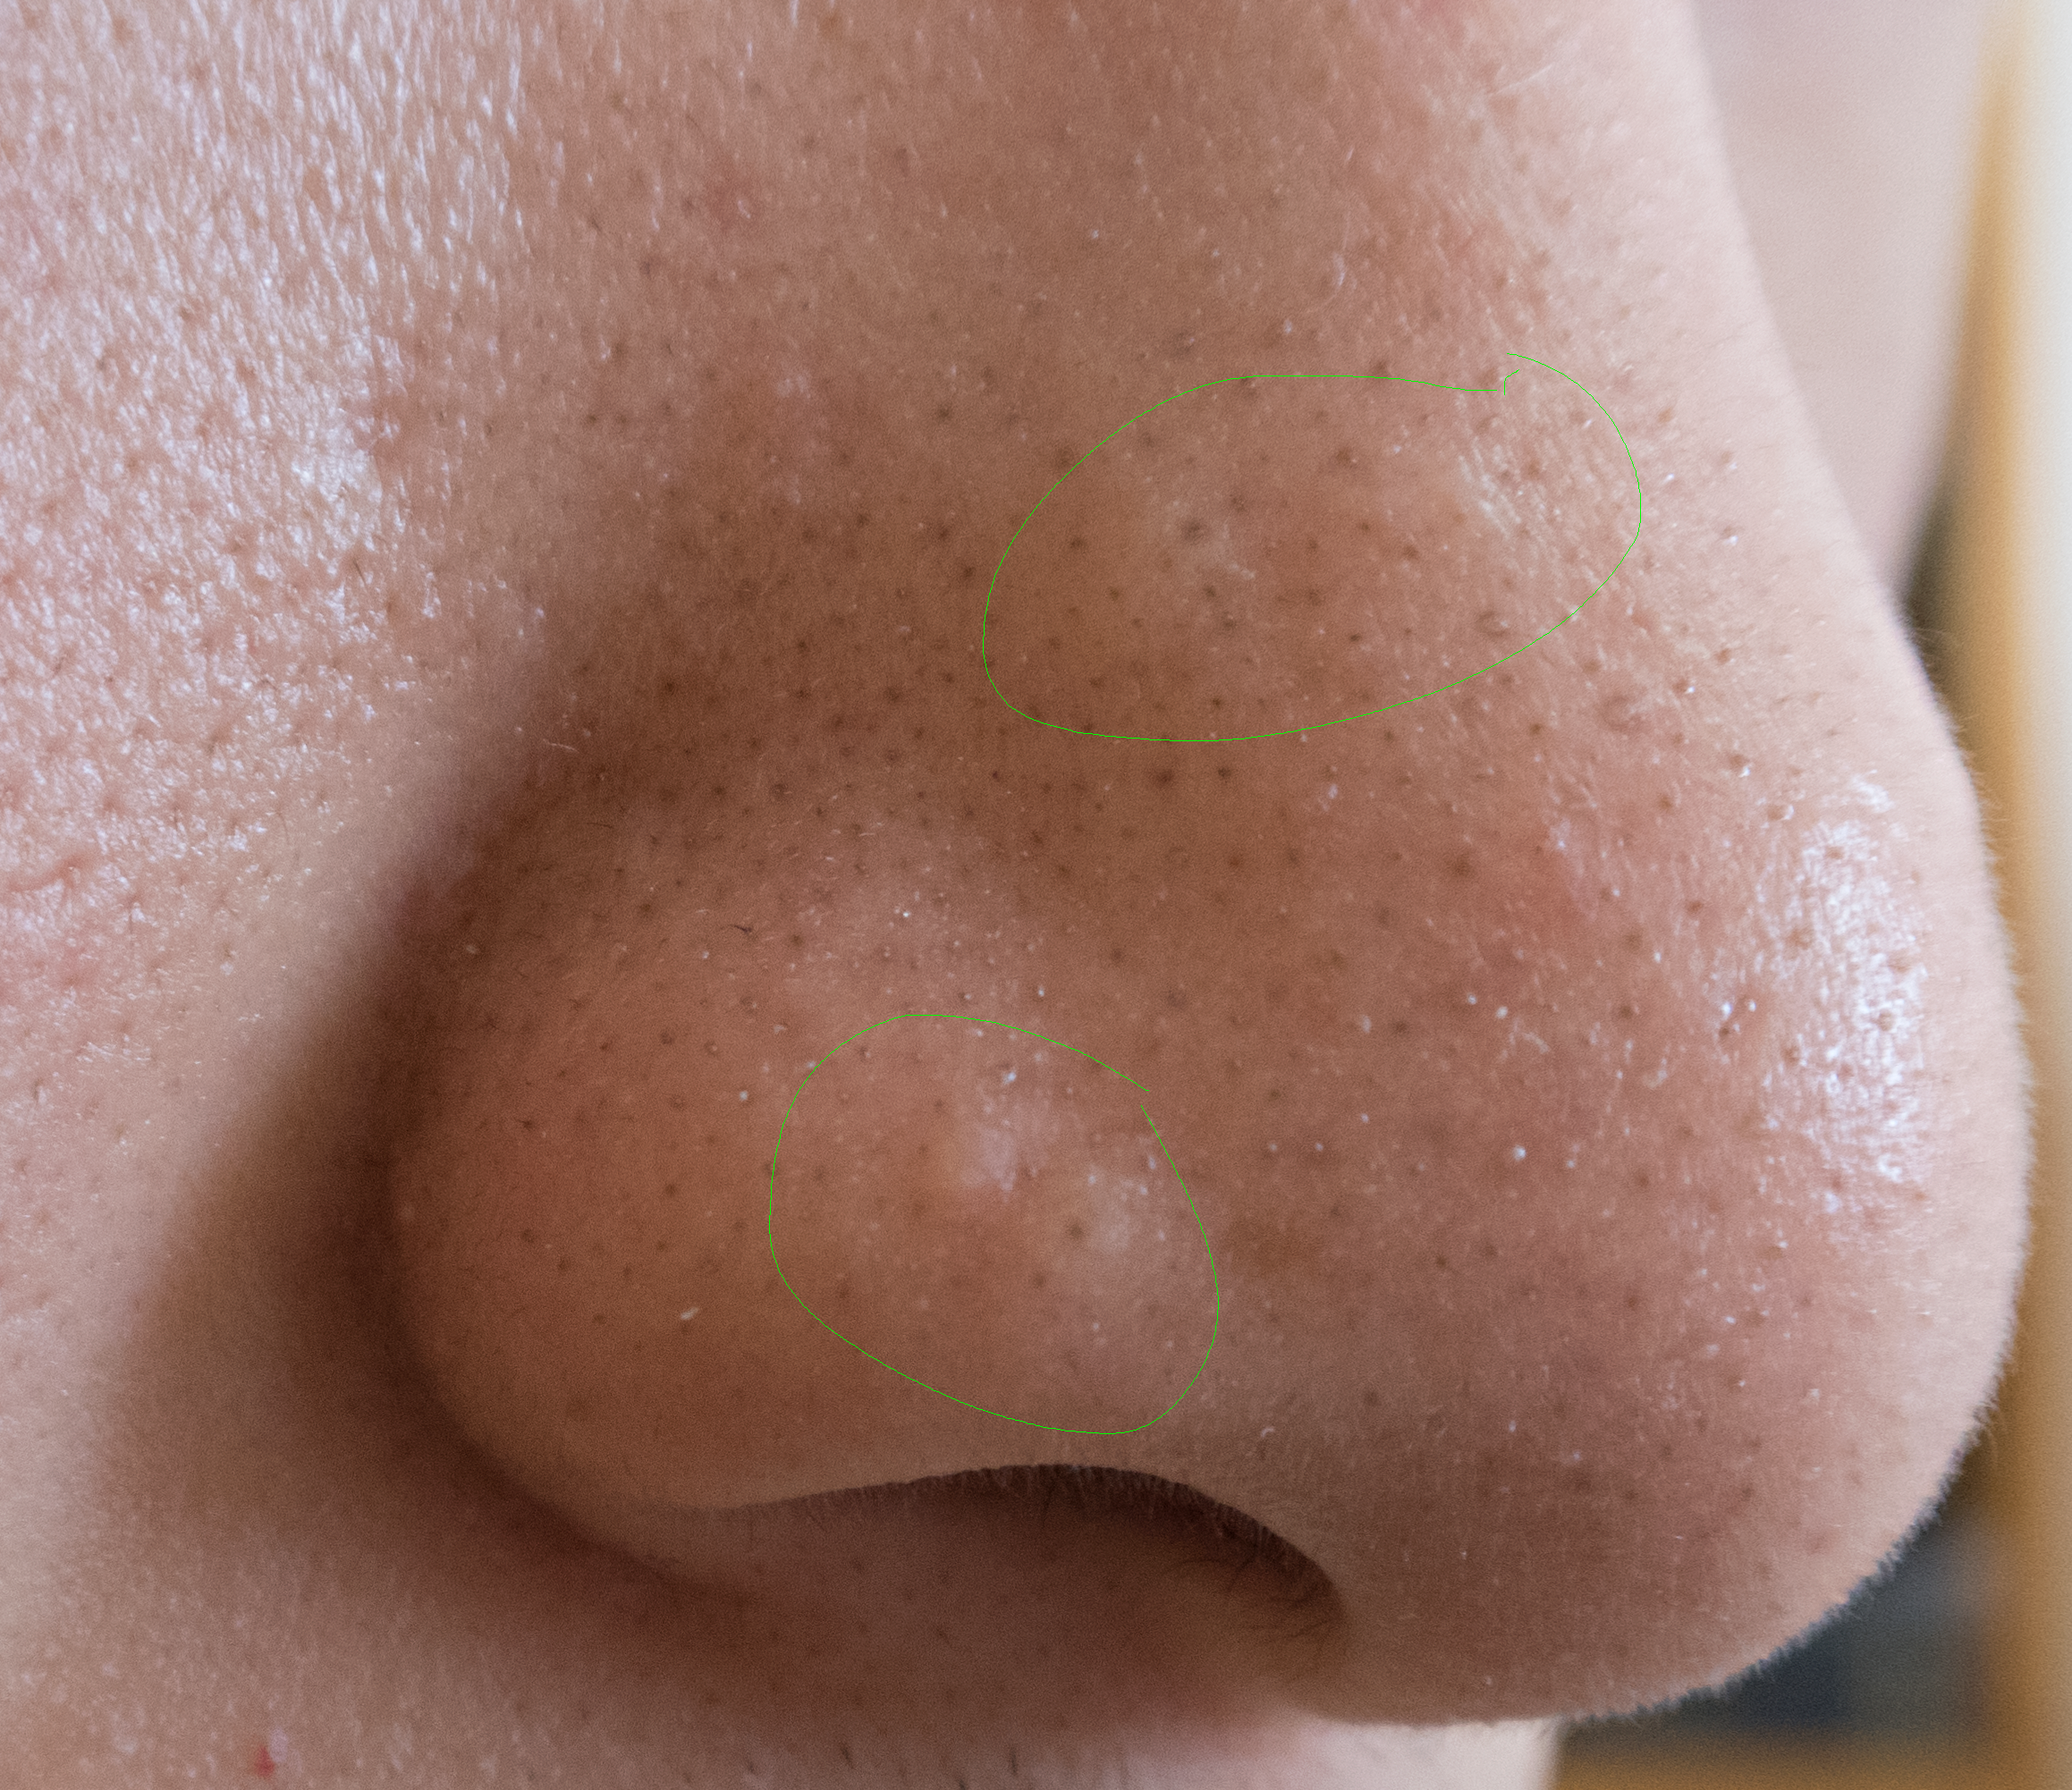 List 102+ Images what are the black spots on my nose Full HD, 2k, 4k